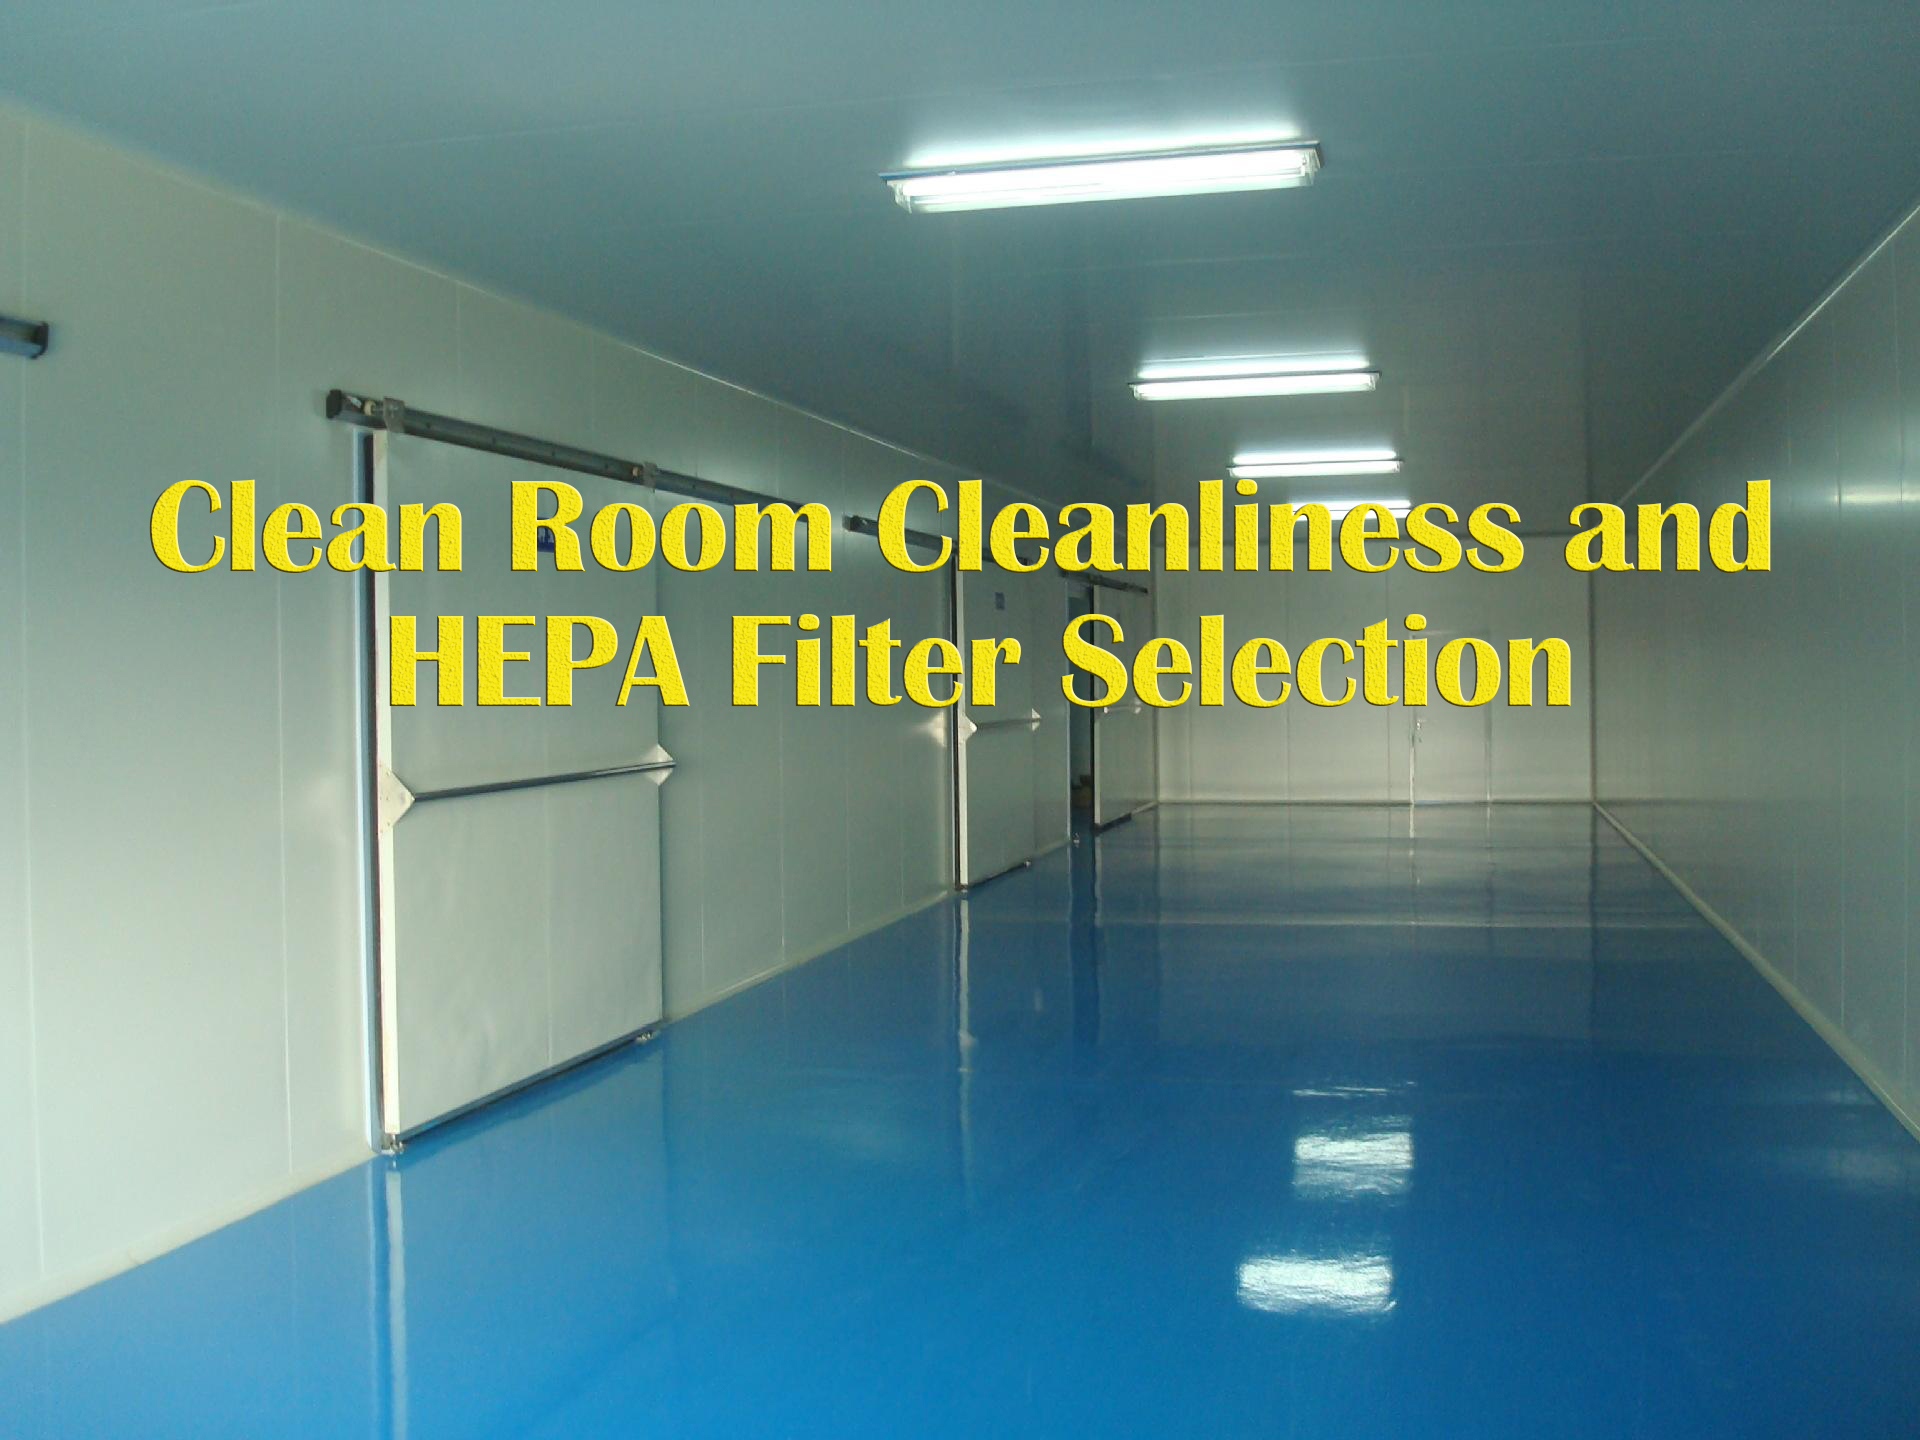 Misunderstanding of Clean Room Cleanliness and HEPA Filter Selection